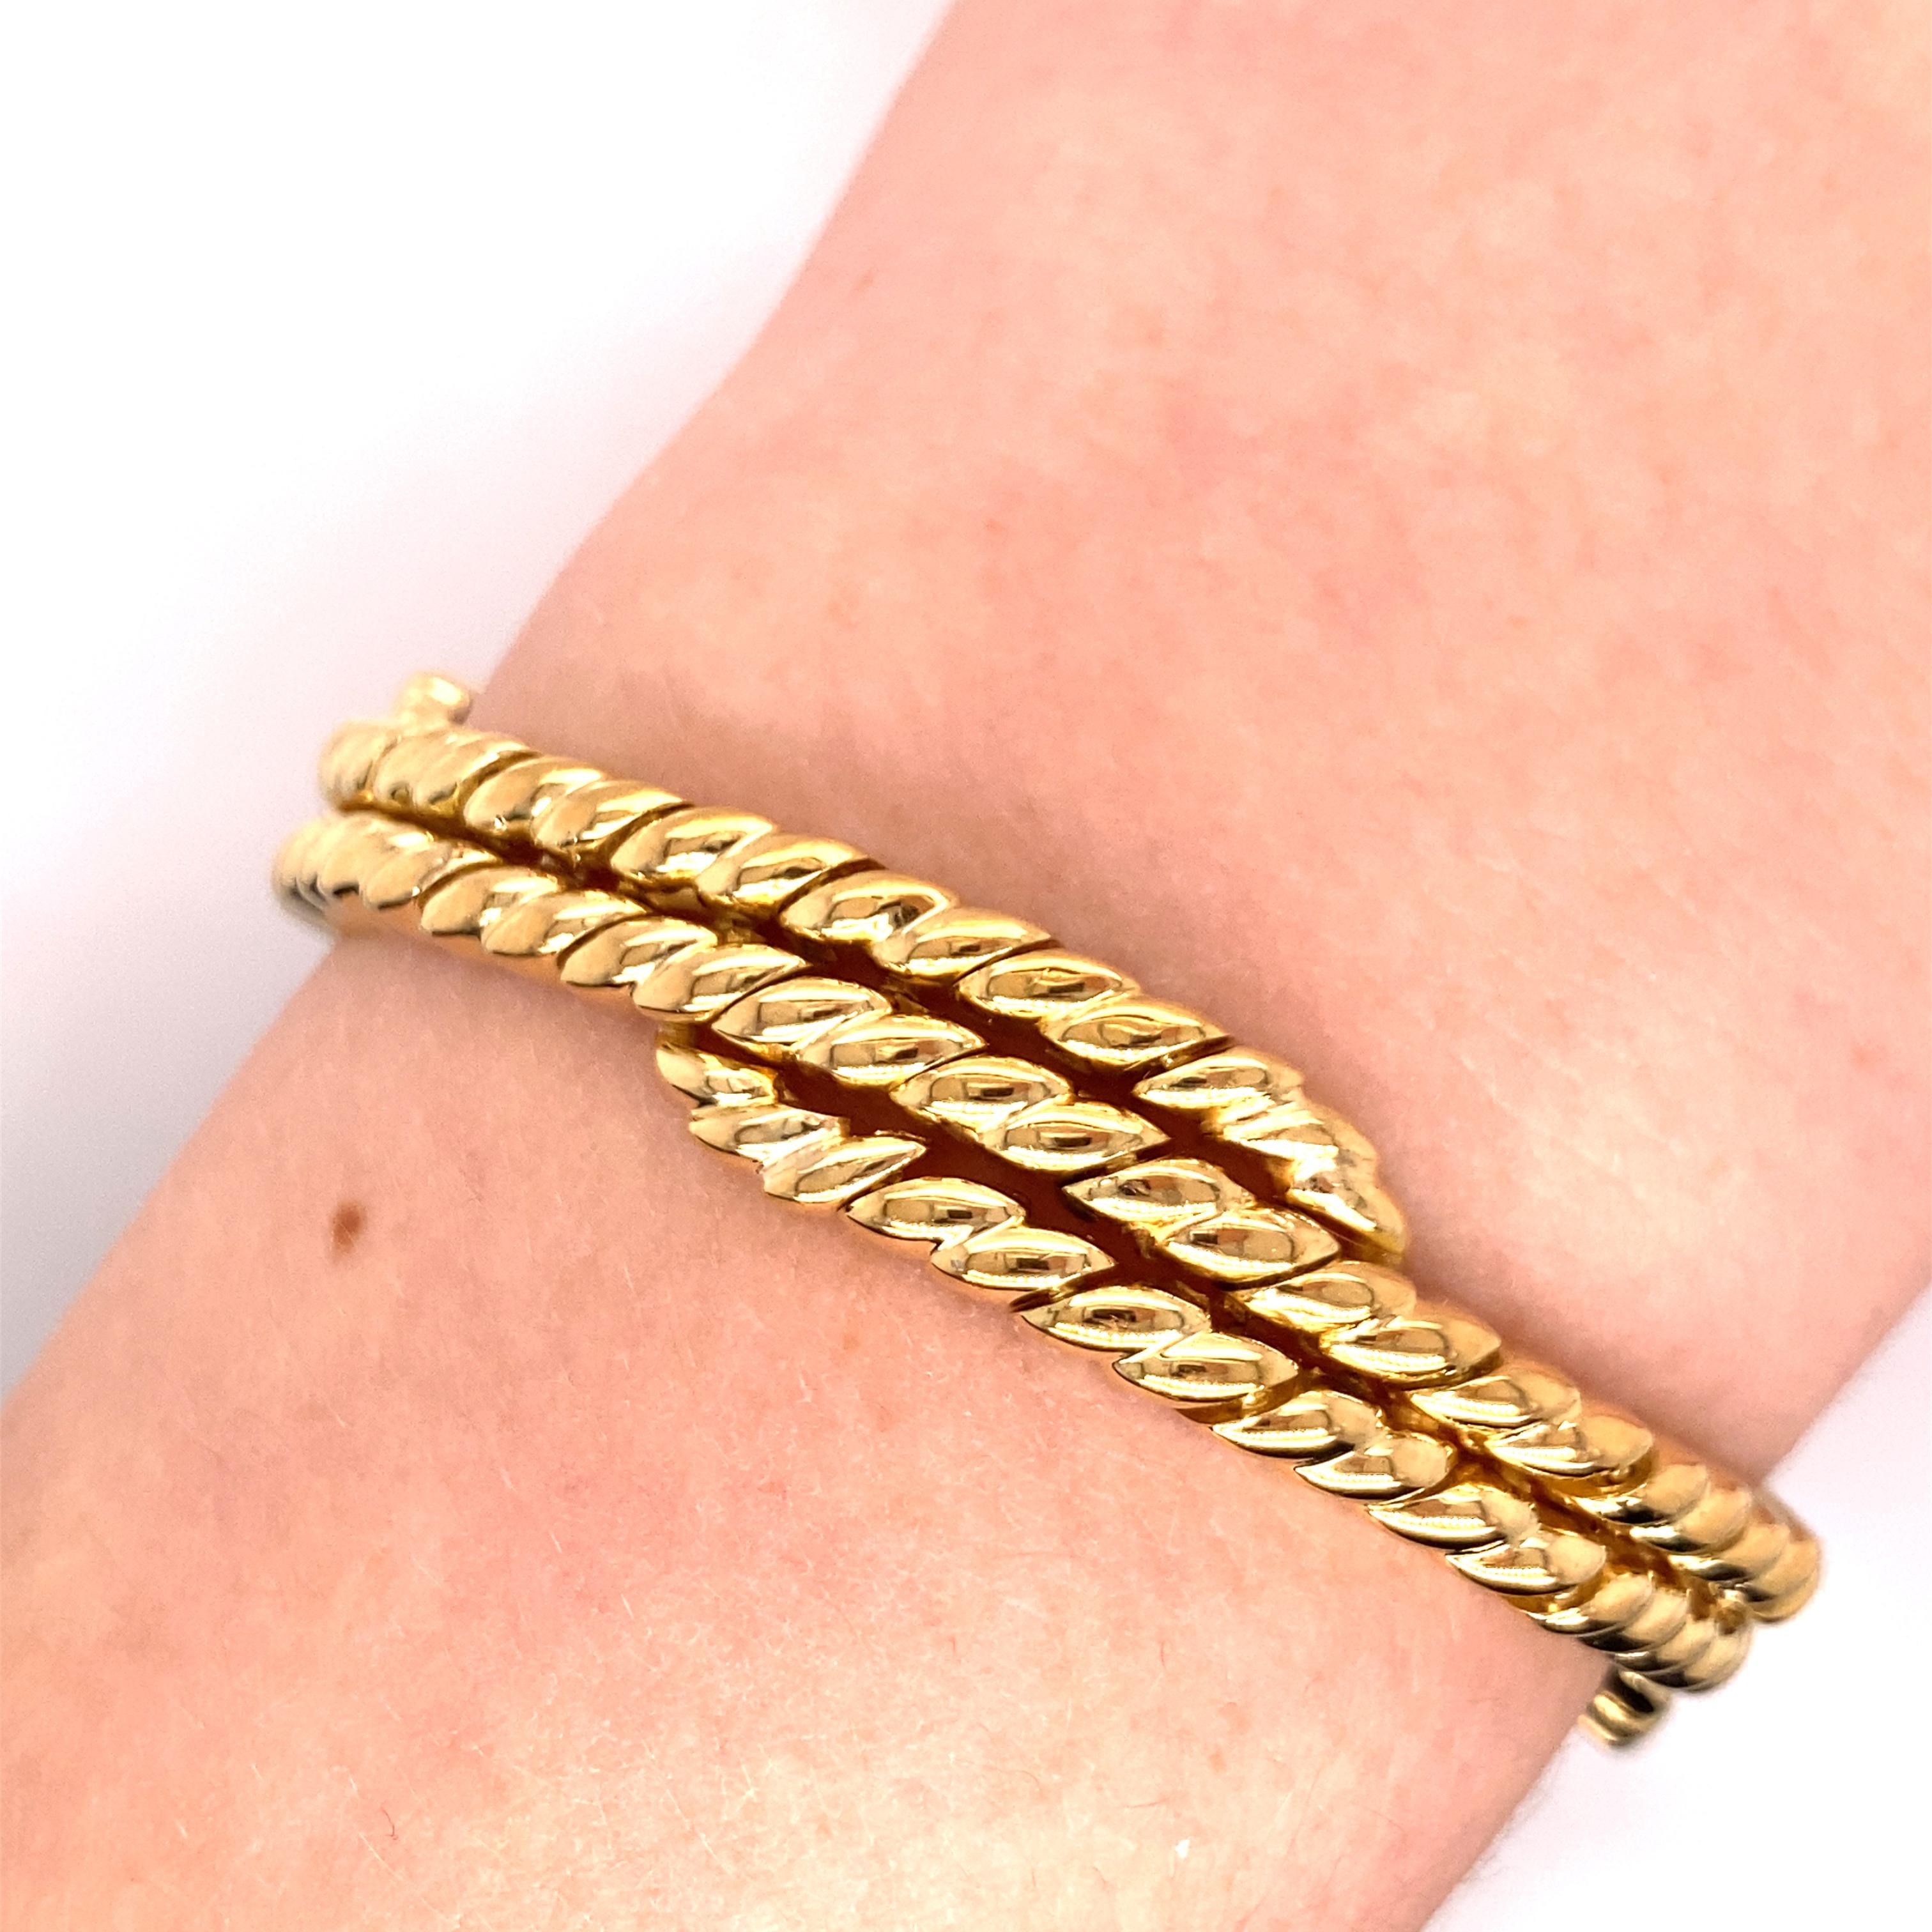 Vintage 1990's 18K Yellow Gold 2-3 Row Croissant Link Bracelet - The bracelet is made up of heavy casted links and features a double wide plunger clasp with push buttons on the side. the length of the bracelet is 7.25 inches long and the width is